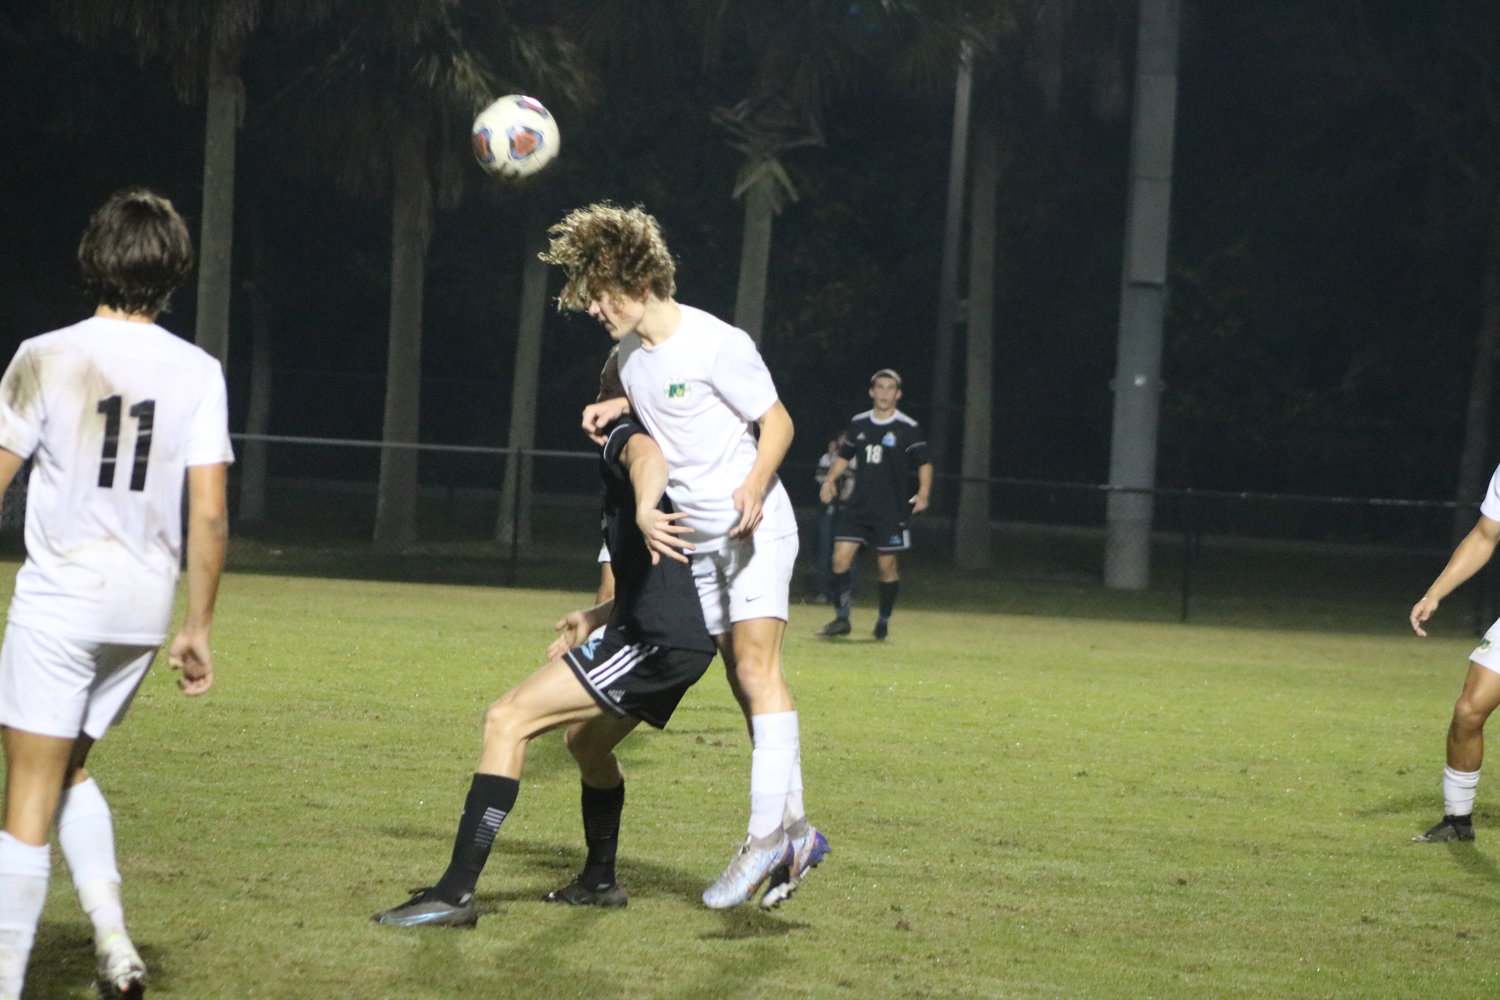 The Nease Panthers will be one of four boys soccer teams competing in the Second Annual Holiday Cup.